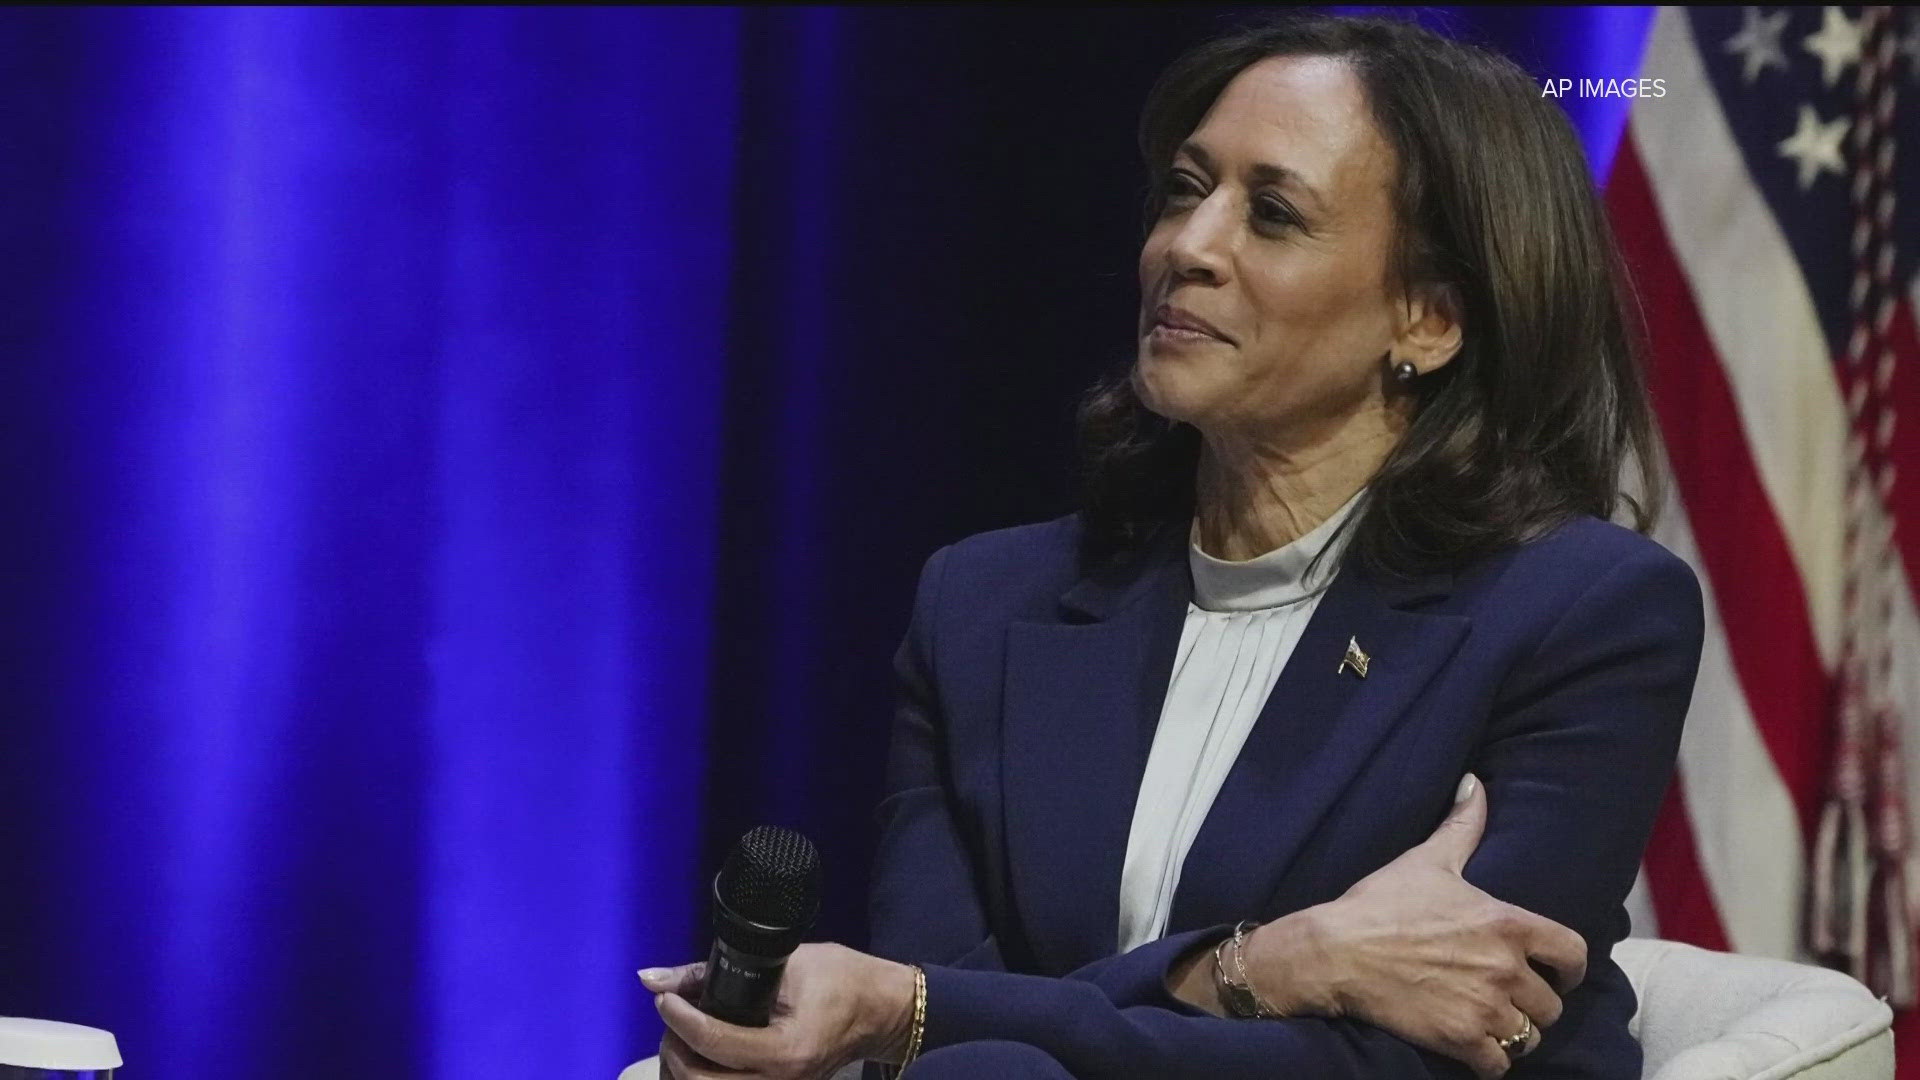 On Thursday afternoon, the White House announced that Vice President Kamala Harris will be kicking off a nationwide "The Economic Opportunity Tour" in Atlanta.